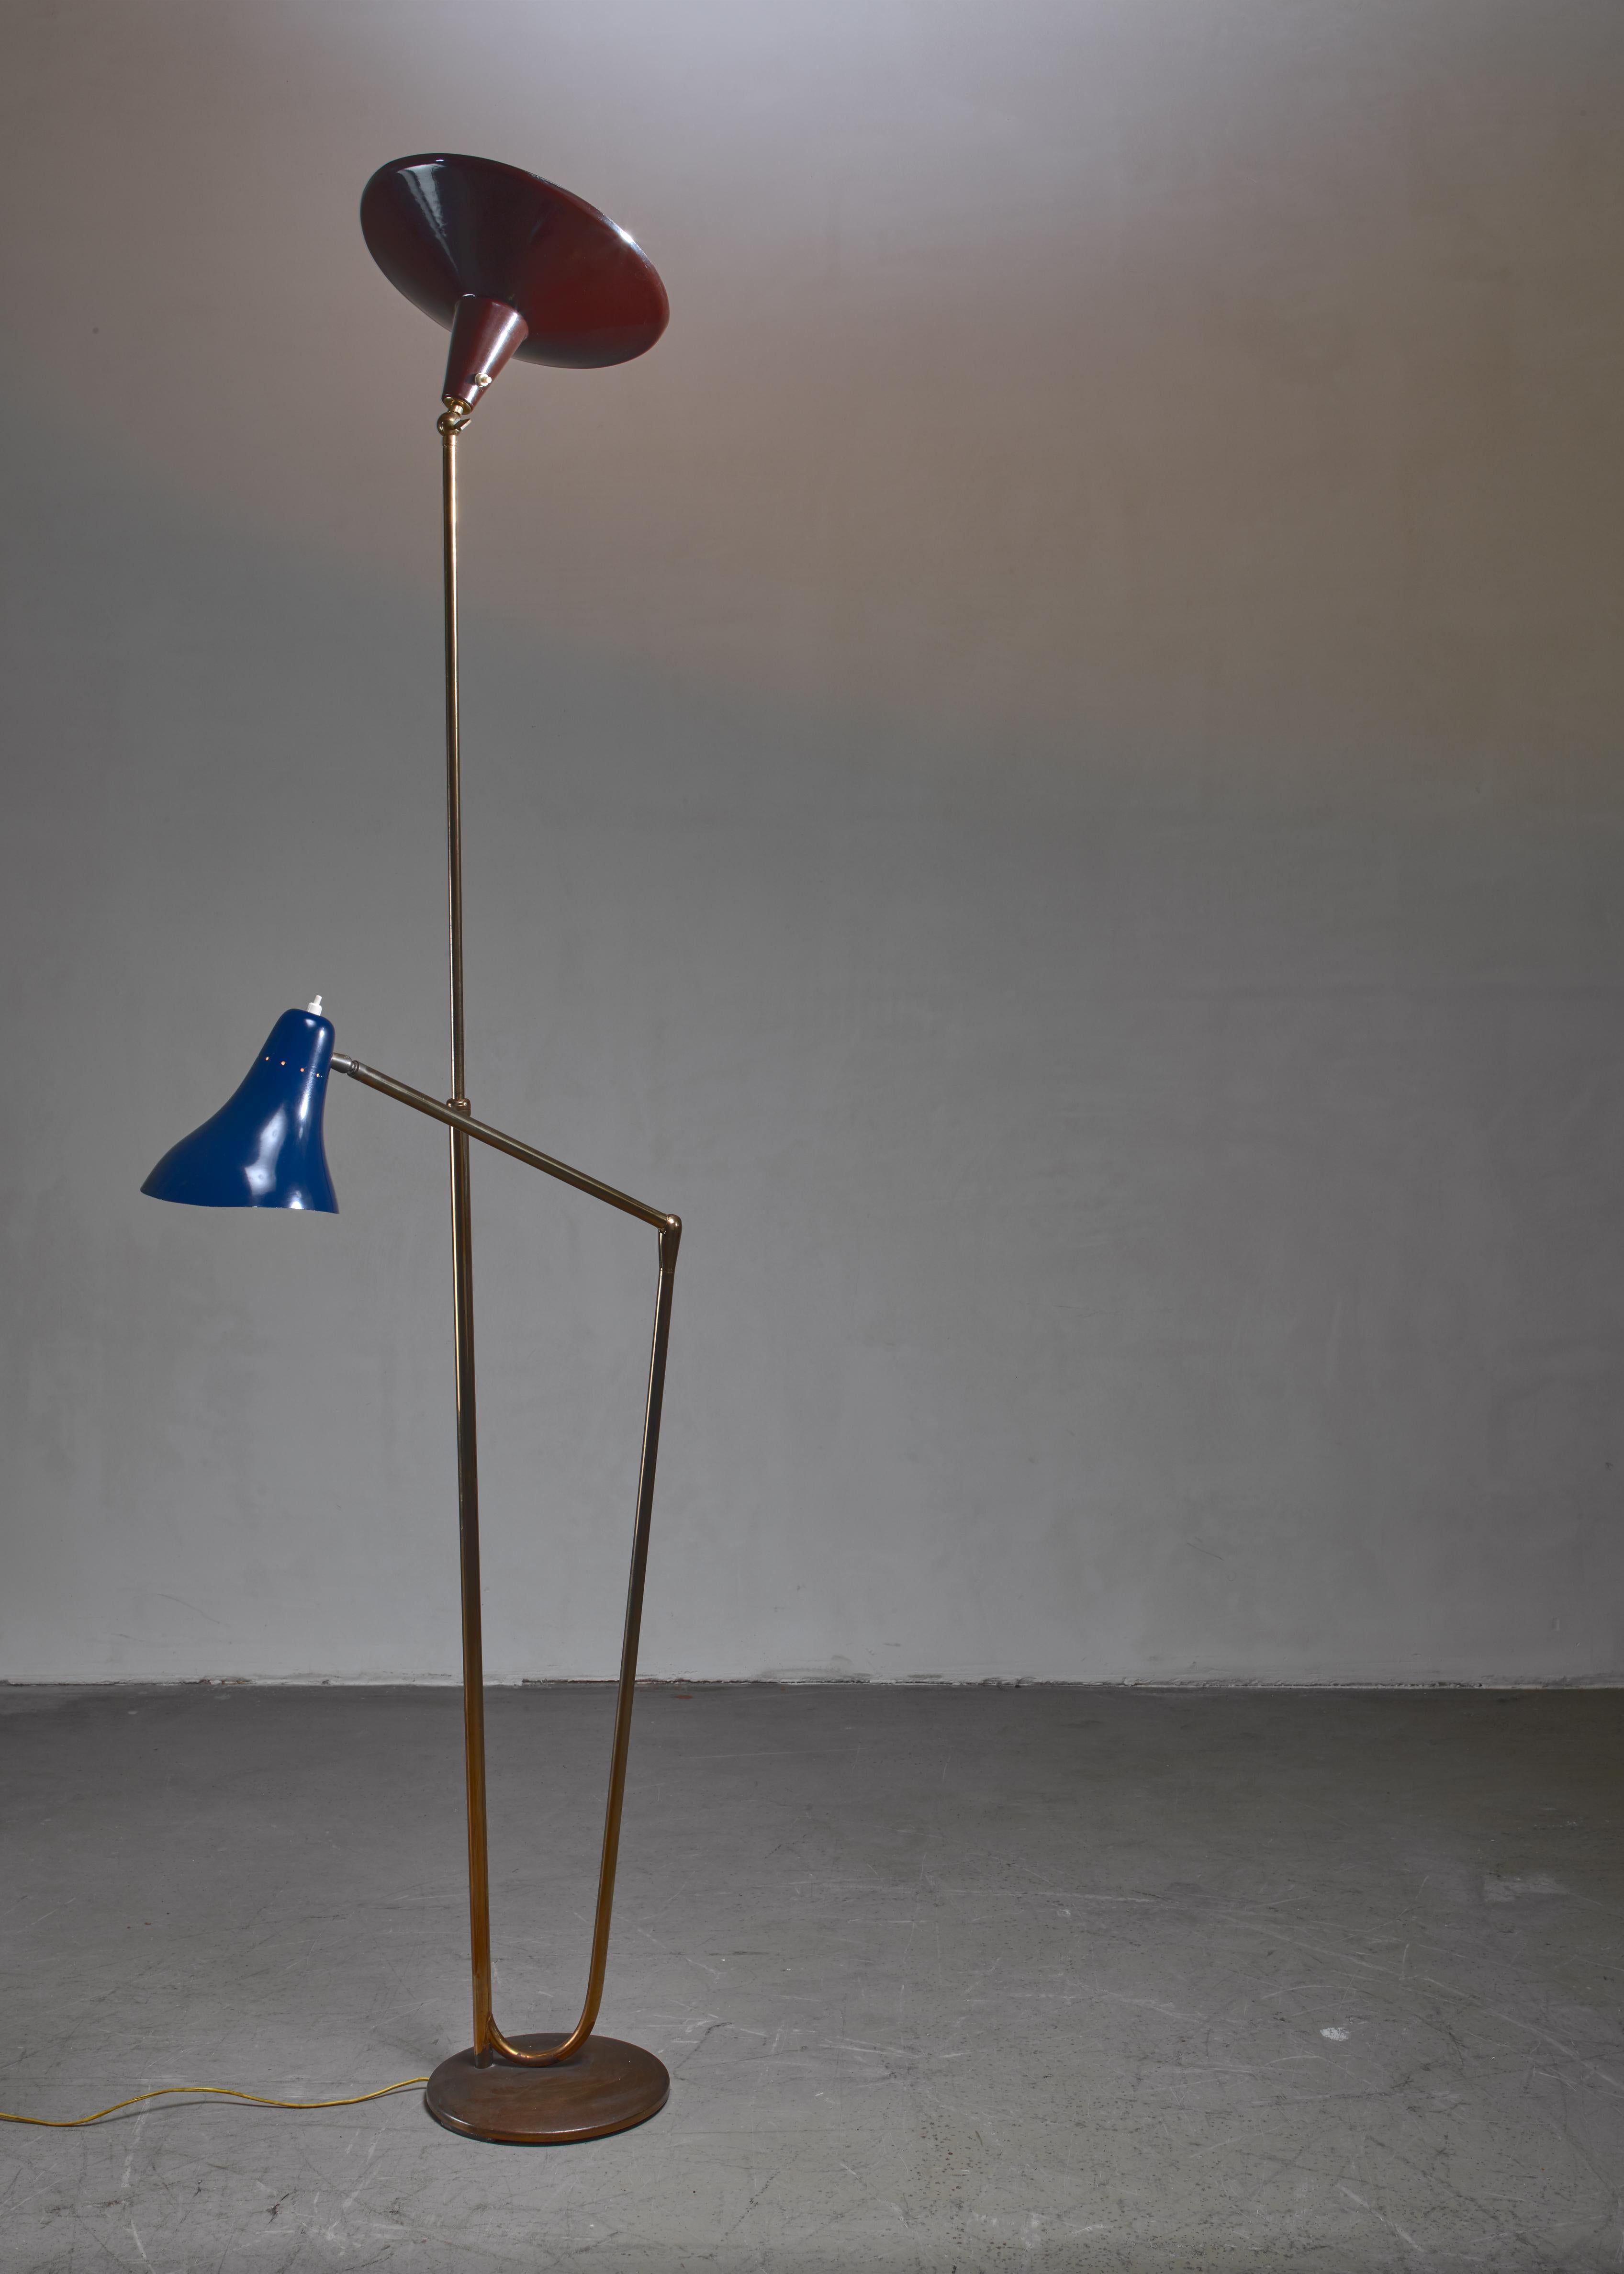 A Guiseppe Ostuni for O-Luce attributed floor lamp with two lacquered metal shades in dark brown and blue on brass arms.

The smaller blue shade has a ball-joint connection and an adjustable arm. The adjustable brown shade has a height-adjustable